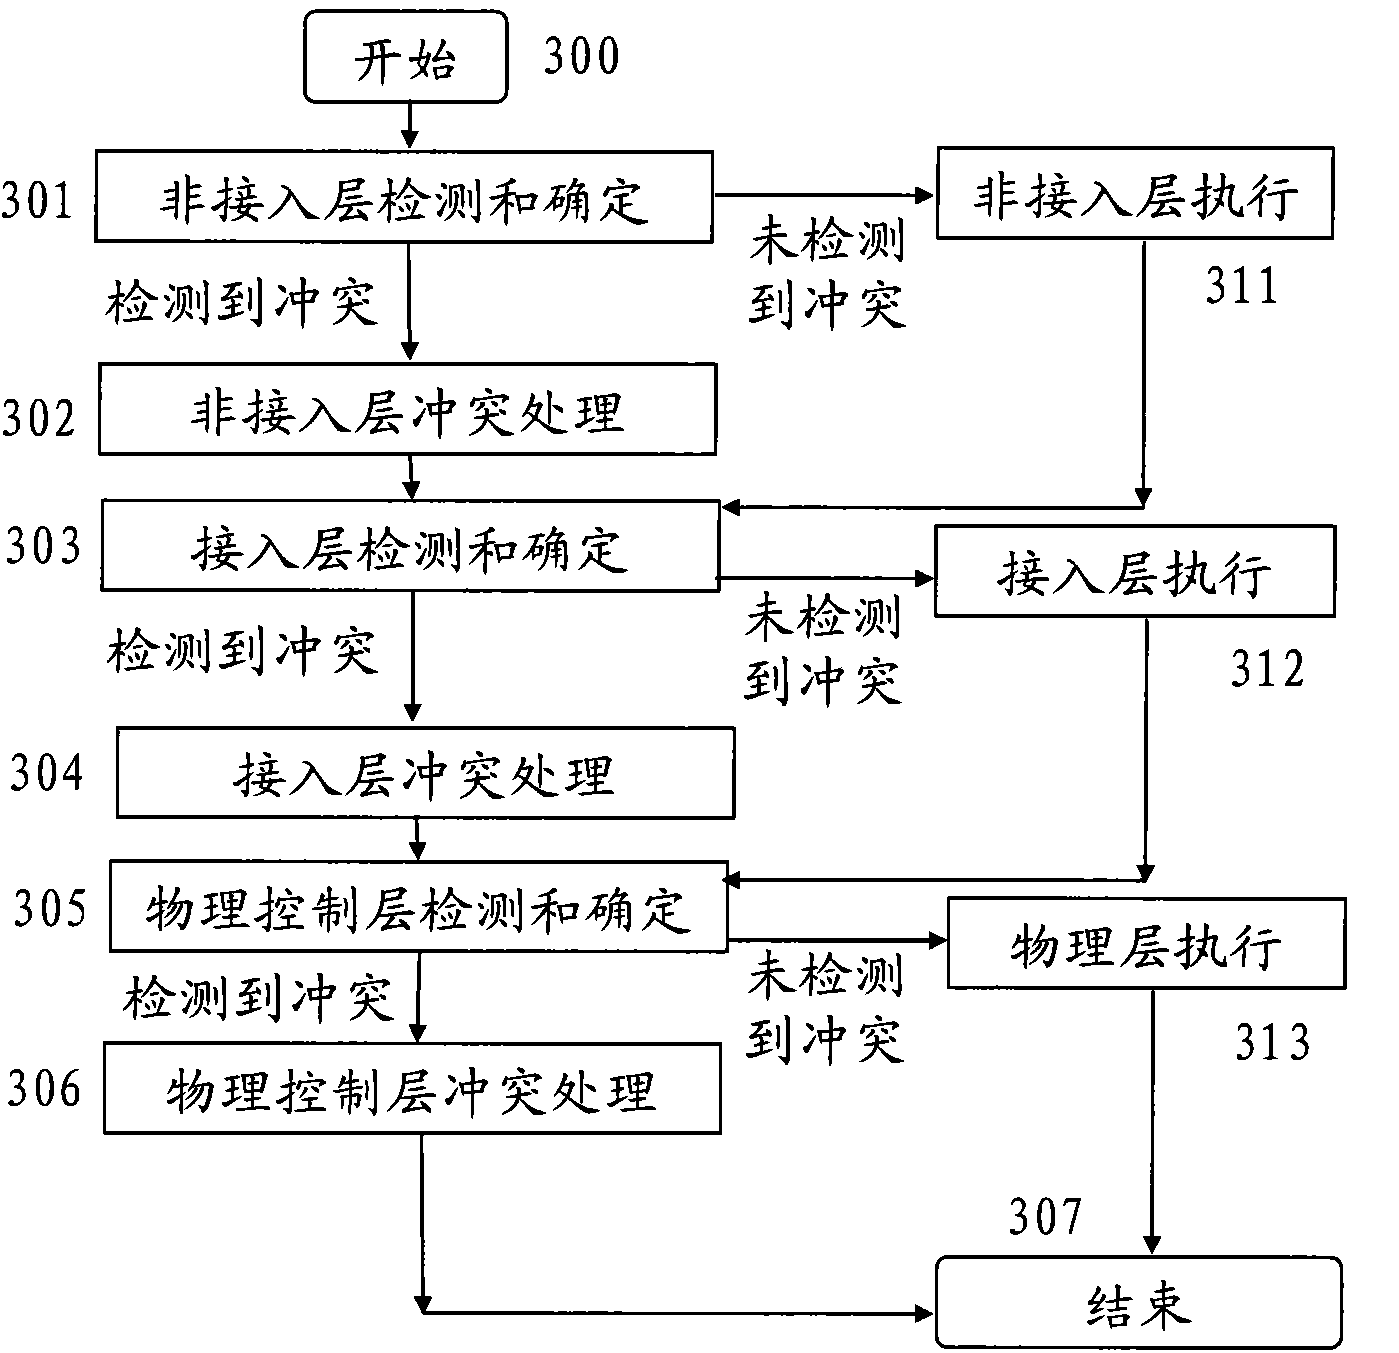 Multi-mode multi-card mobile terminal and business conflict solution method and apparatus thereof